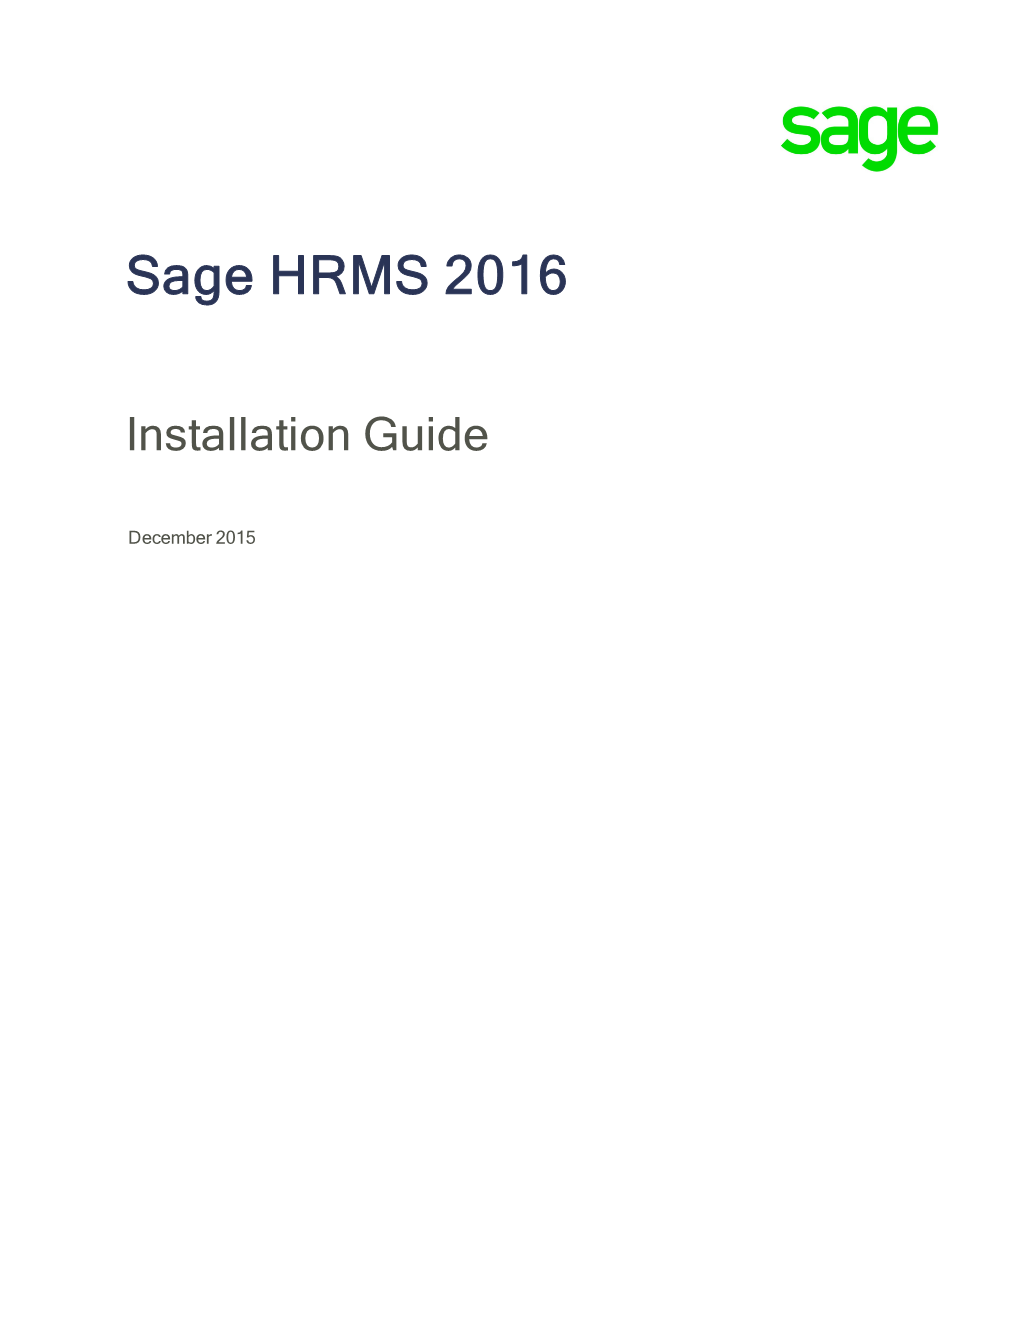 Sage HRMS 2016 Installation Guide - Iii Contents